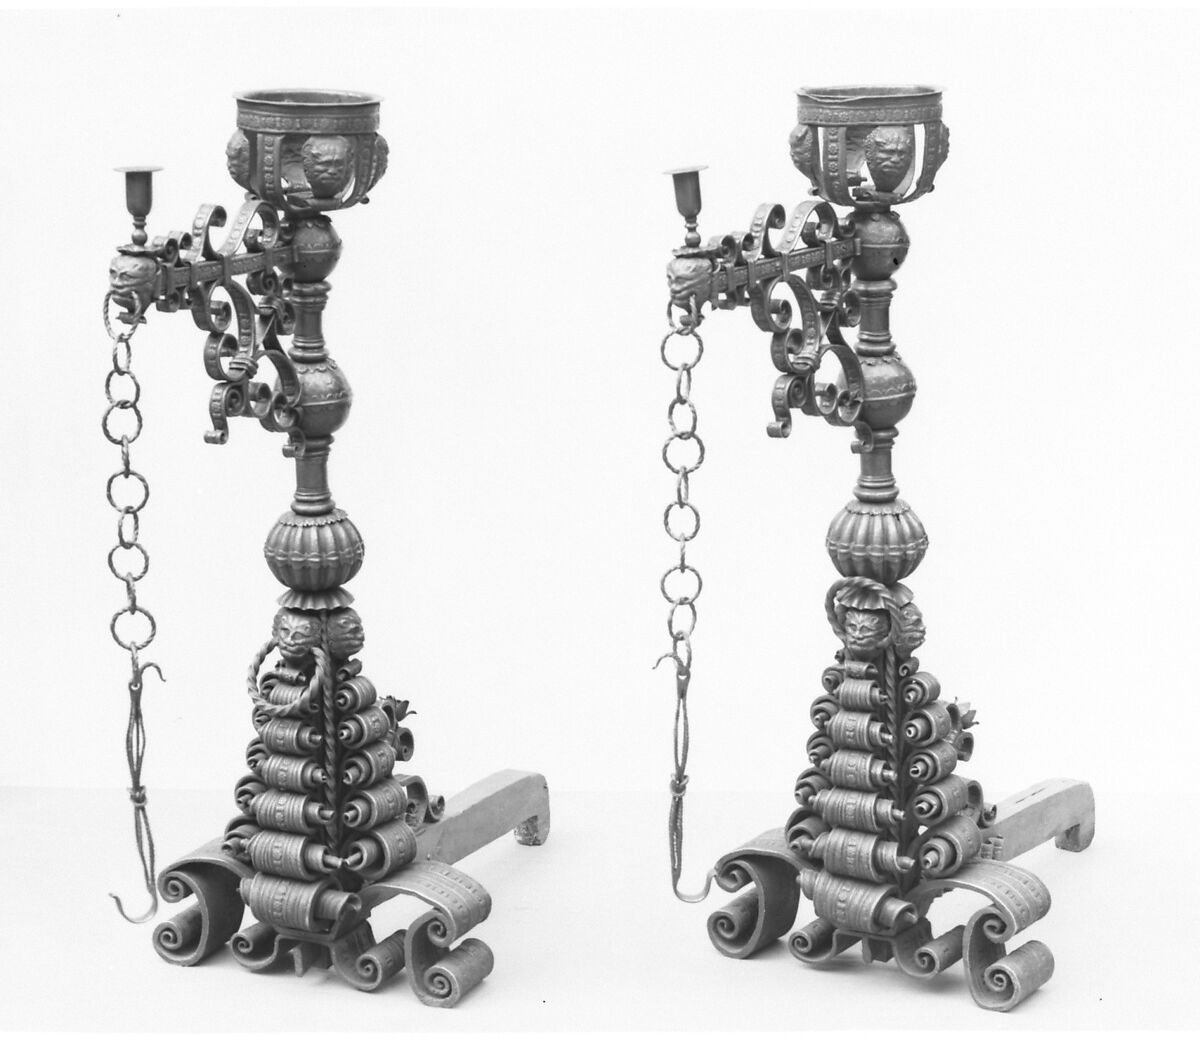 Pair of andirons, Wrought iron, probably Italian, Venice 